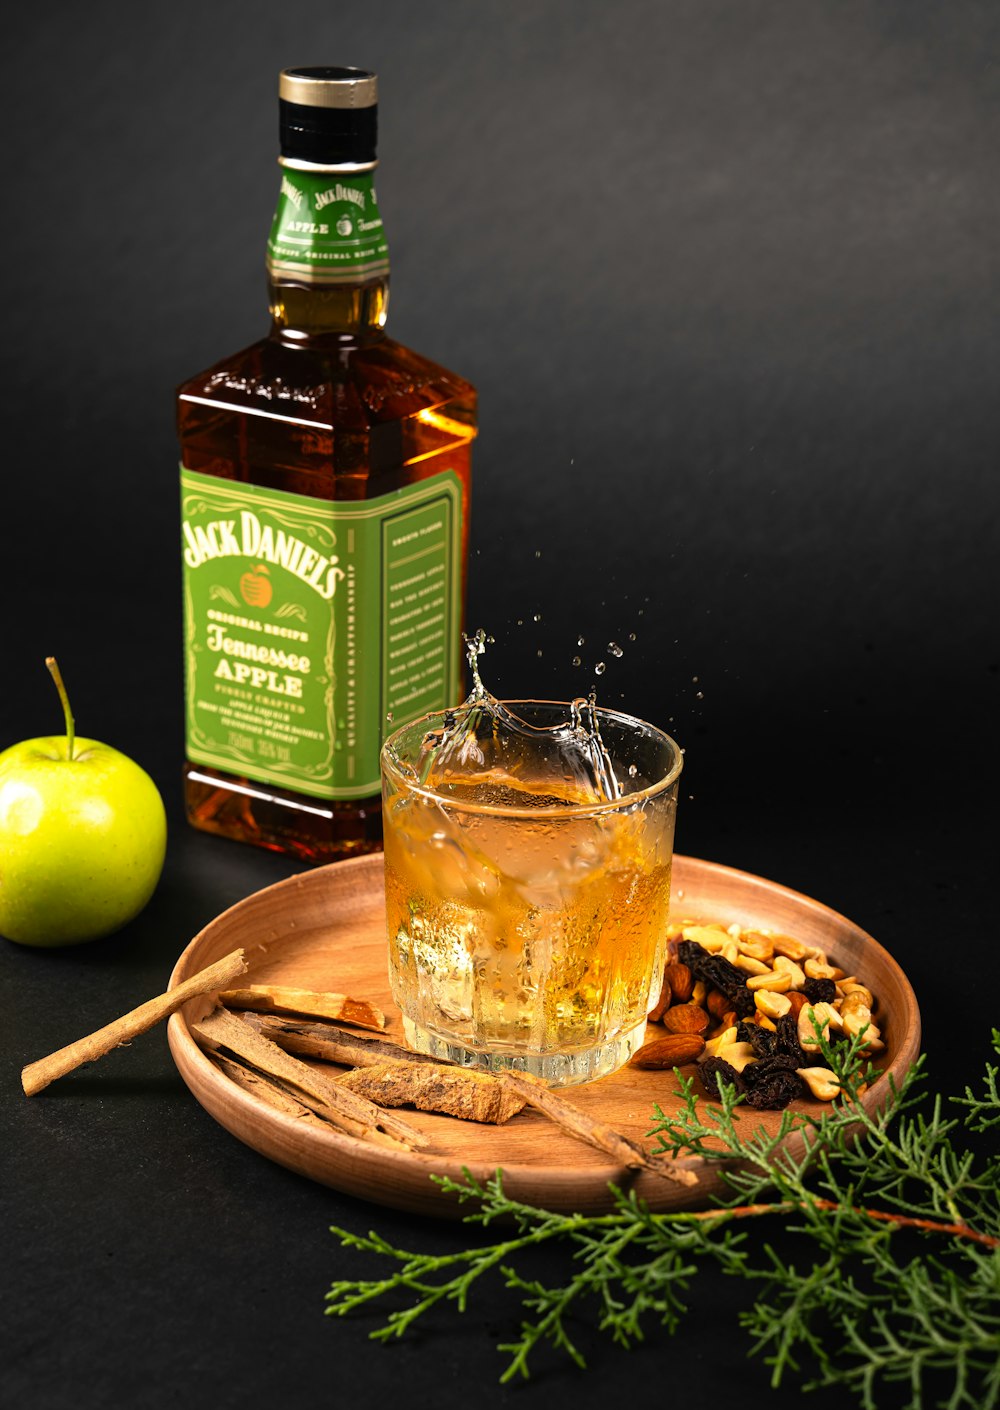 a bottle of jack daniels next to a glass of apple cider